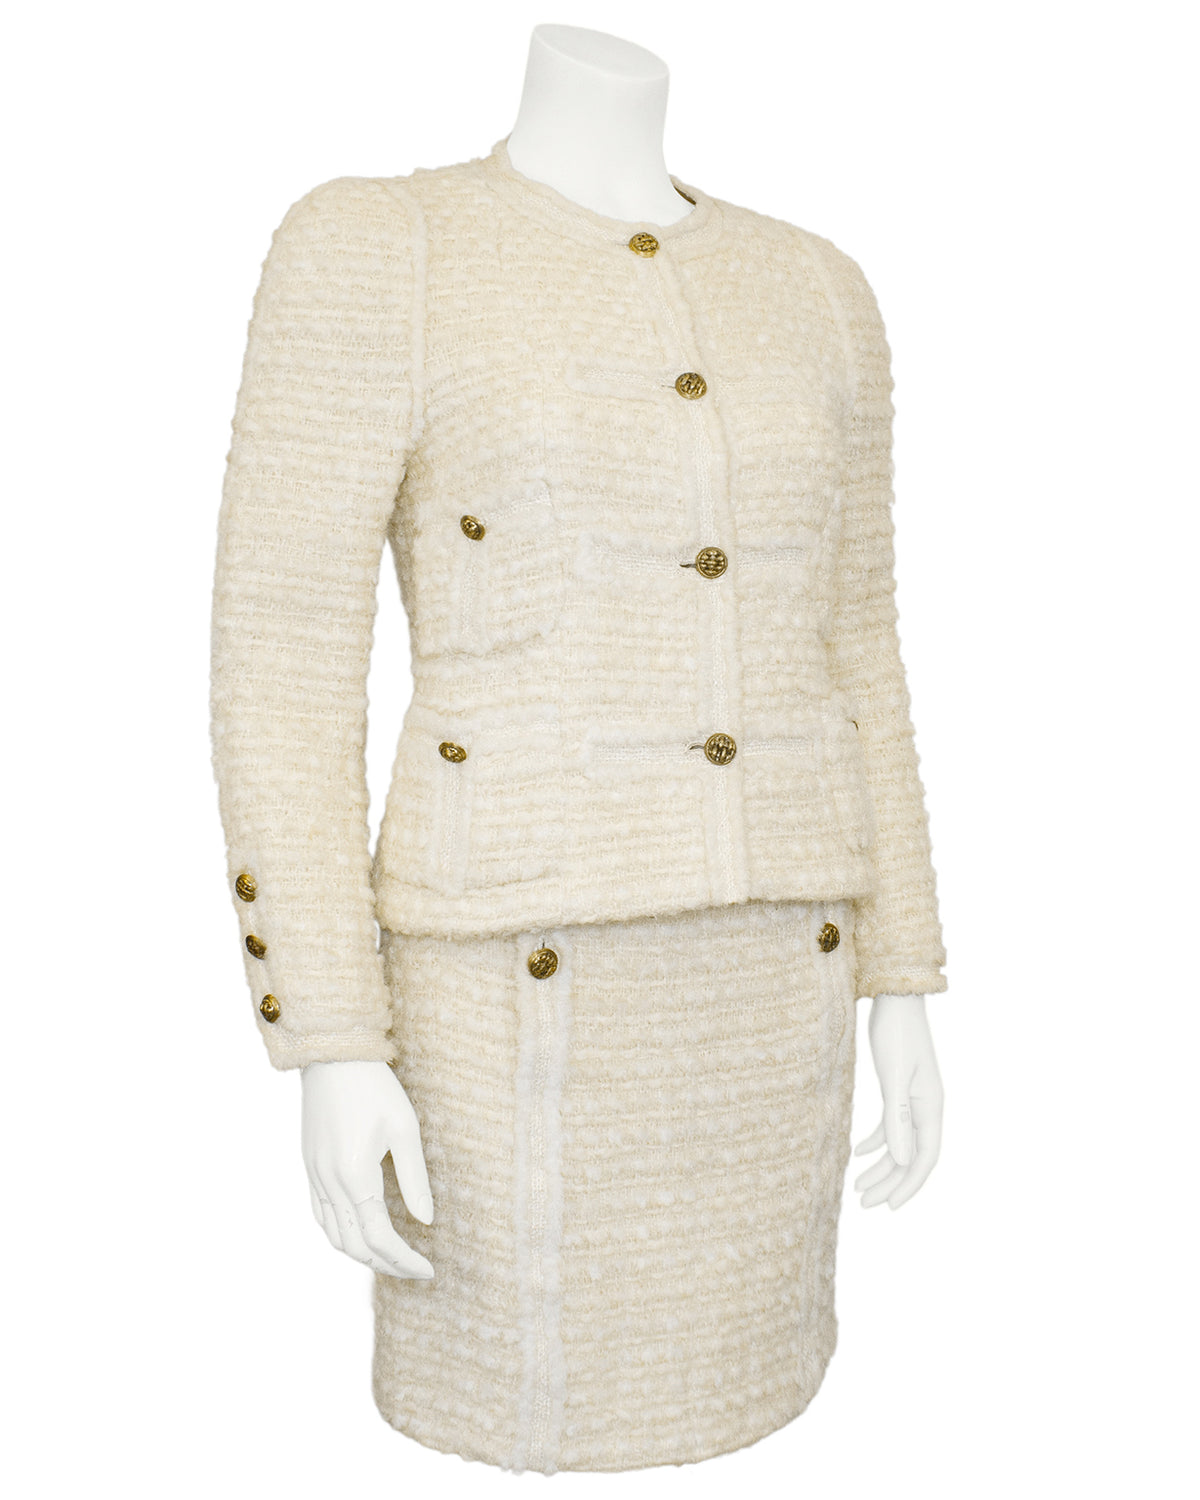 winter white Chanel tweed suit  Tweed jacket and skirt, Clothes design,  Fashion